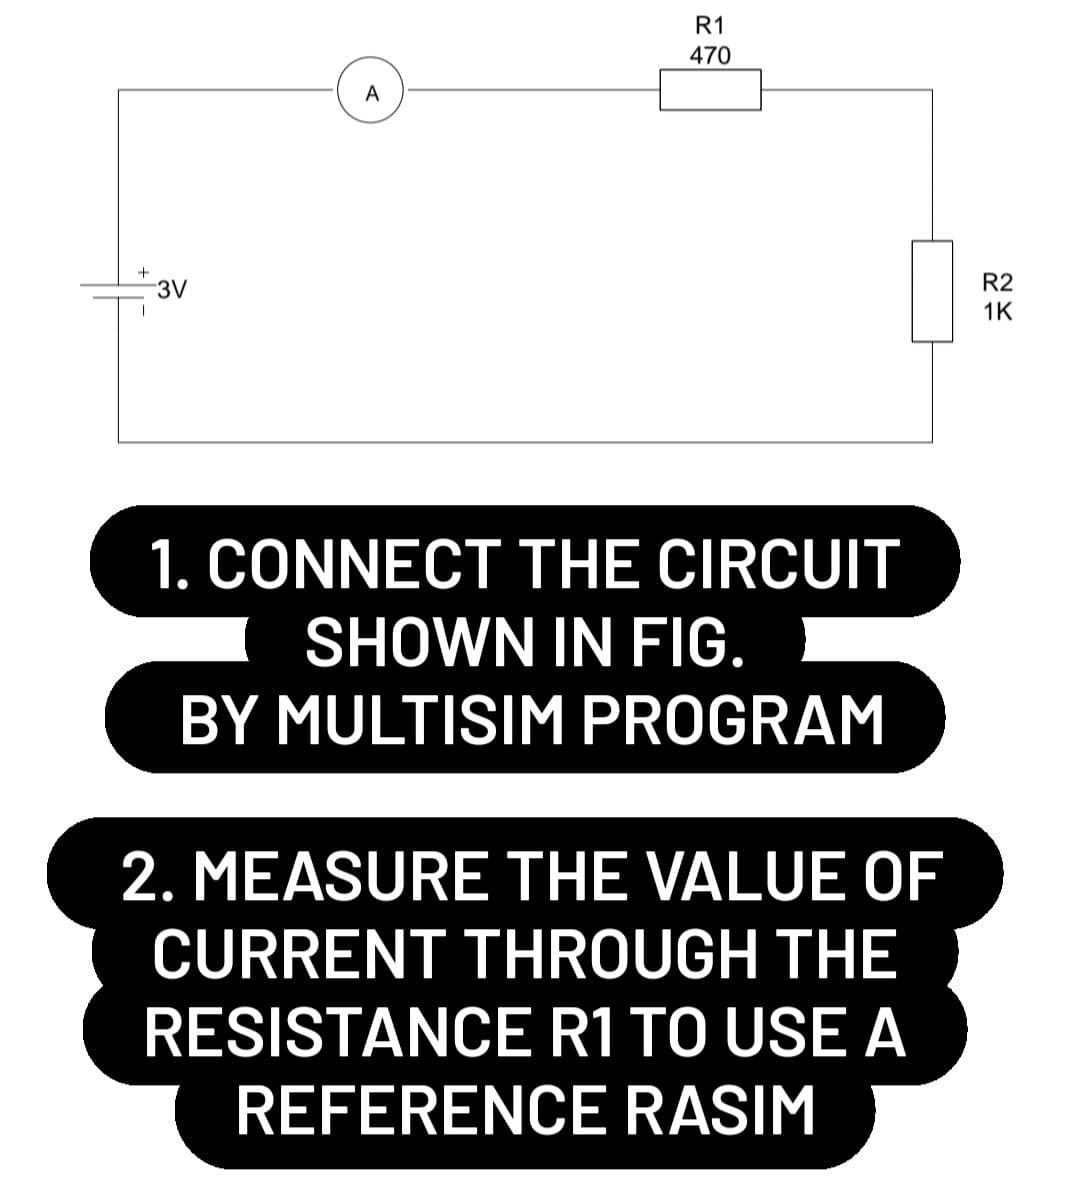 R1
470
3V
1. CONNECT THE CIRCUIT
SHOWN IN FIG.
BY MULTISIM PROGRAM
2. MEASURE THE VALUE OF
CURRENT THROUGH THE
RESISTANCE R1 TO USE A
REFERENCE RASIM
A
R2
1K